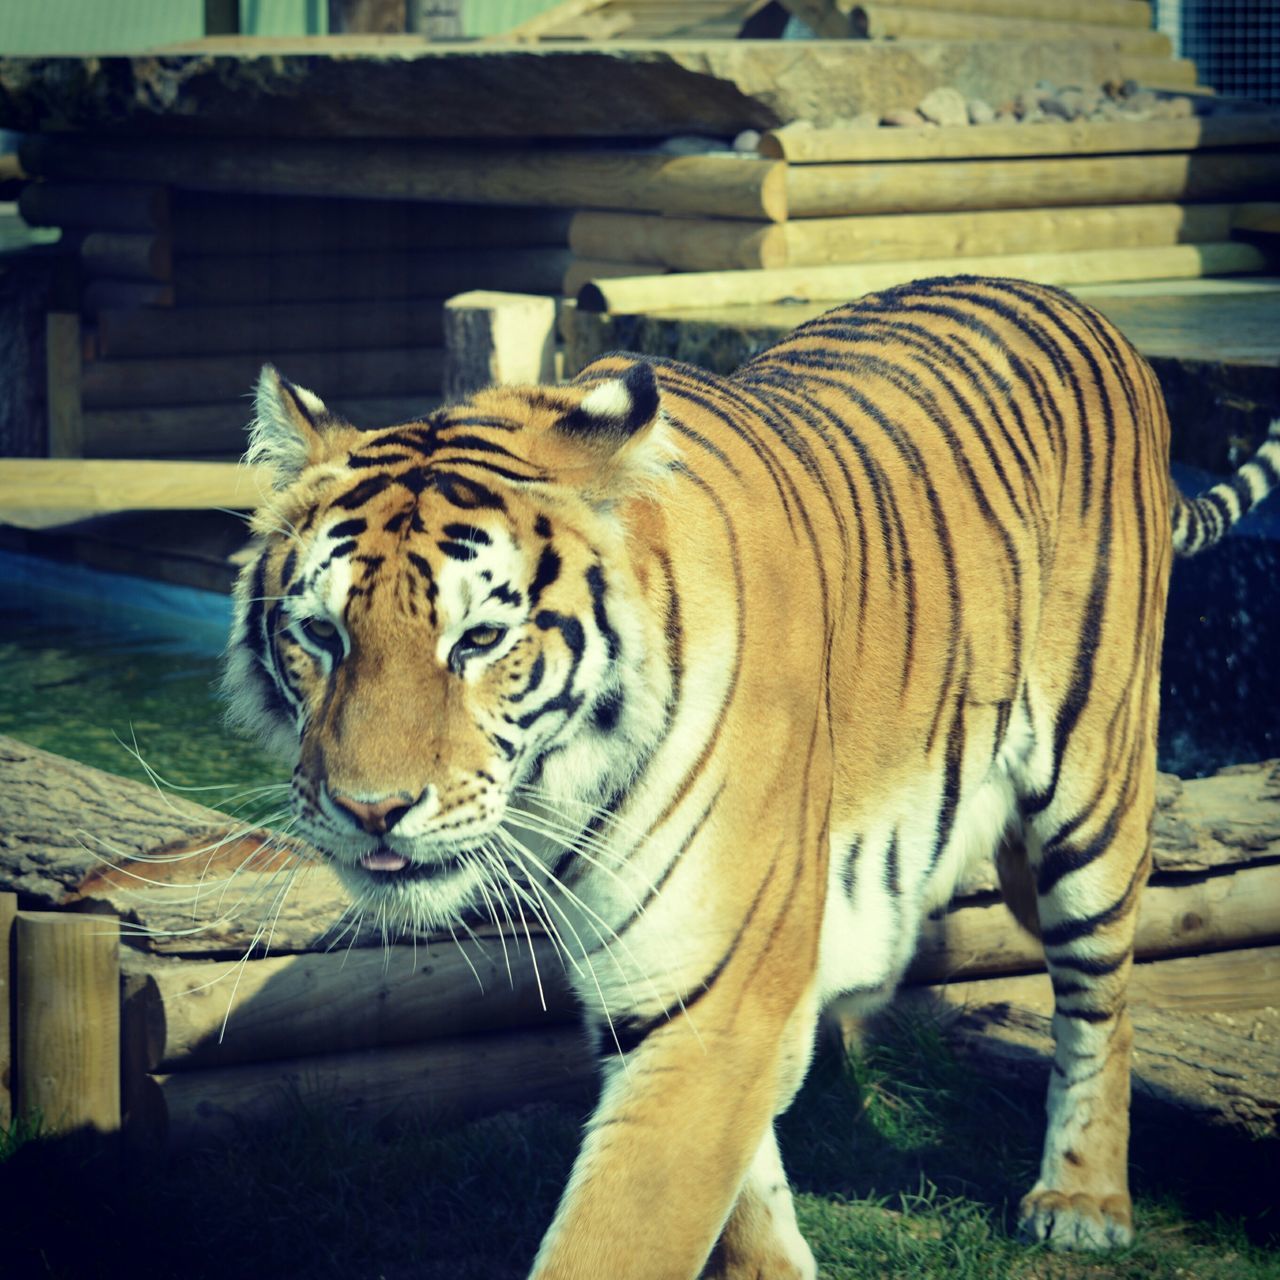 animal themes, mammal, one animal, tiger, zoo, animals in captivity, animal markings, animals in the wild, focus on foreground, wildlife, endangered species, safari animals, animal head, undomesticated cat, close-up, day, no people, outdoors, domestic animals, big cat